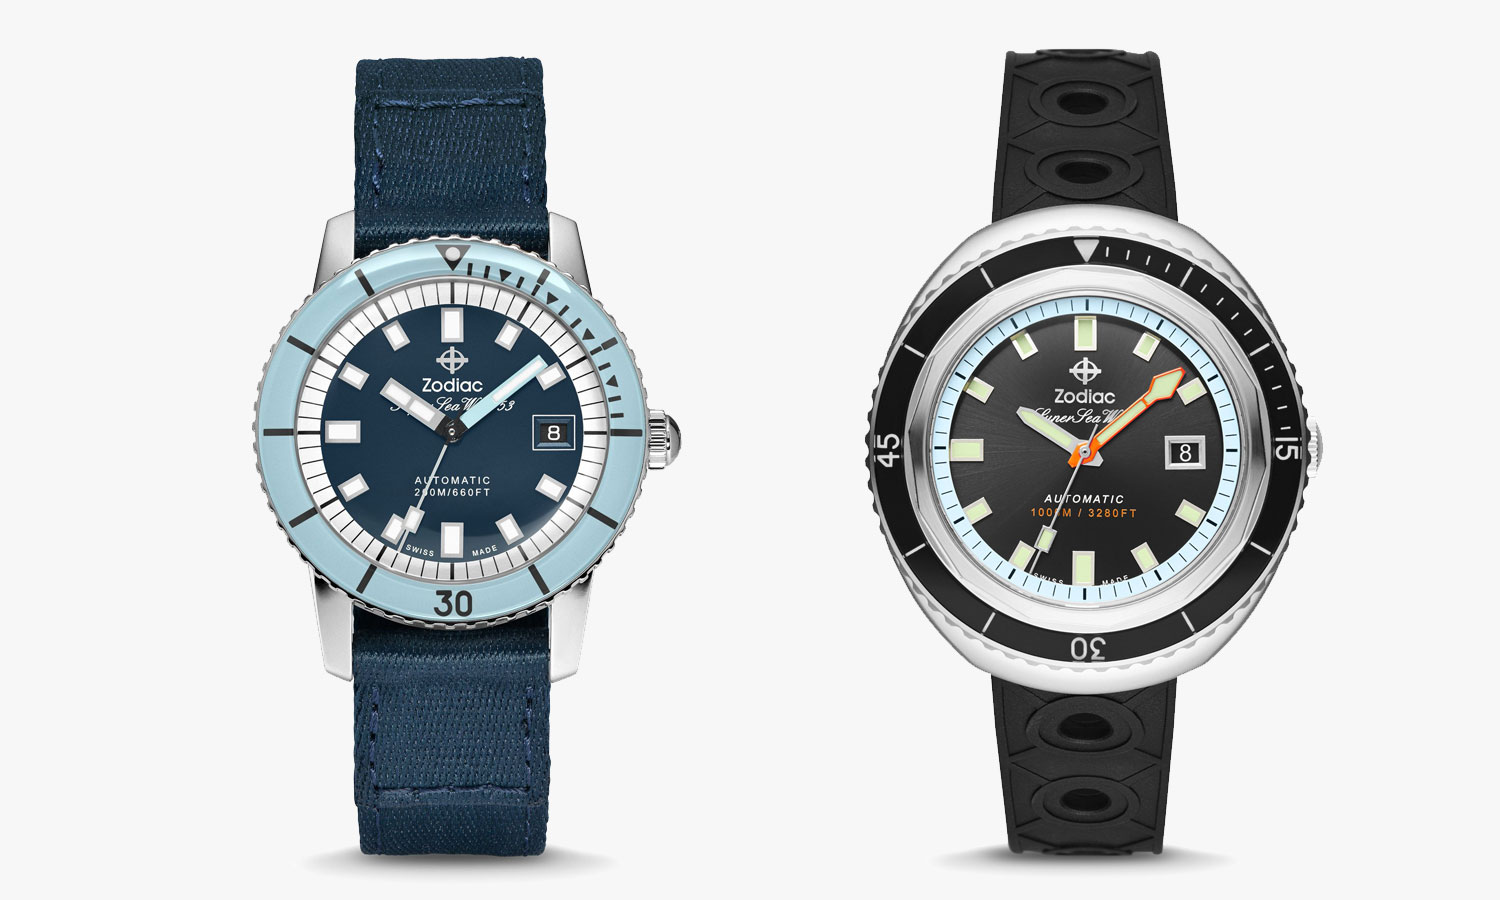 Zodiac’s Retro Dive-Watch is Colored for Summer